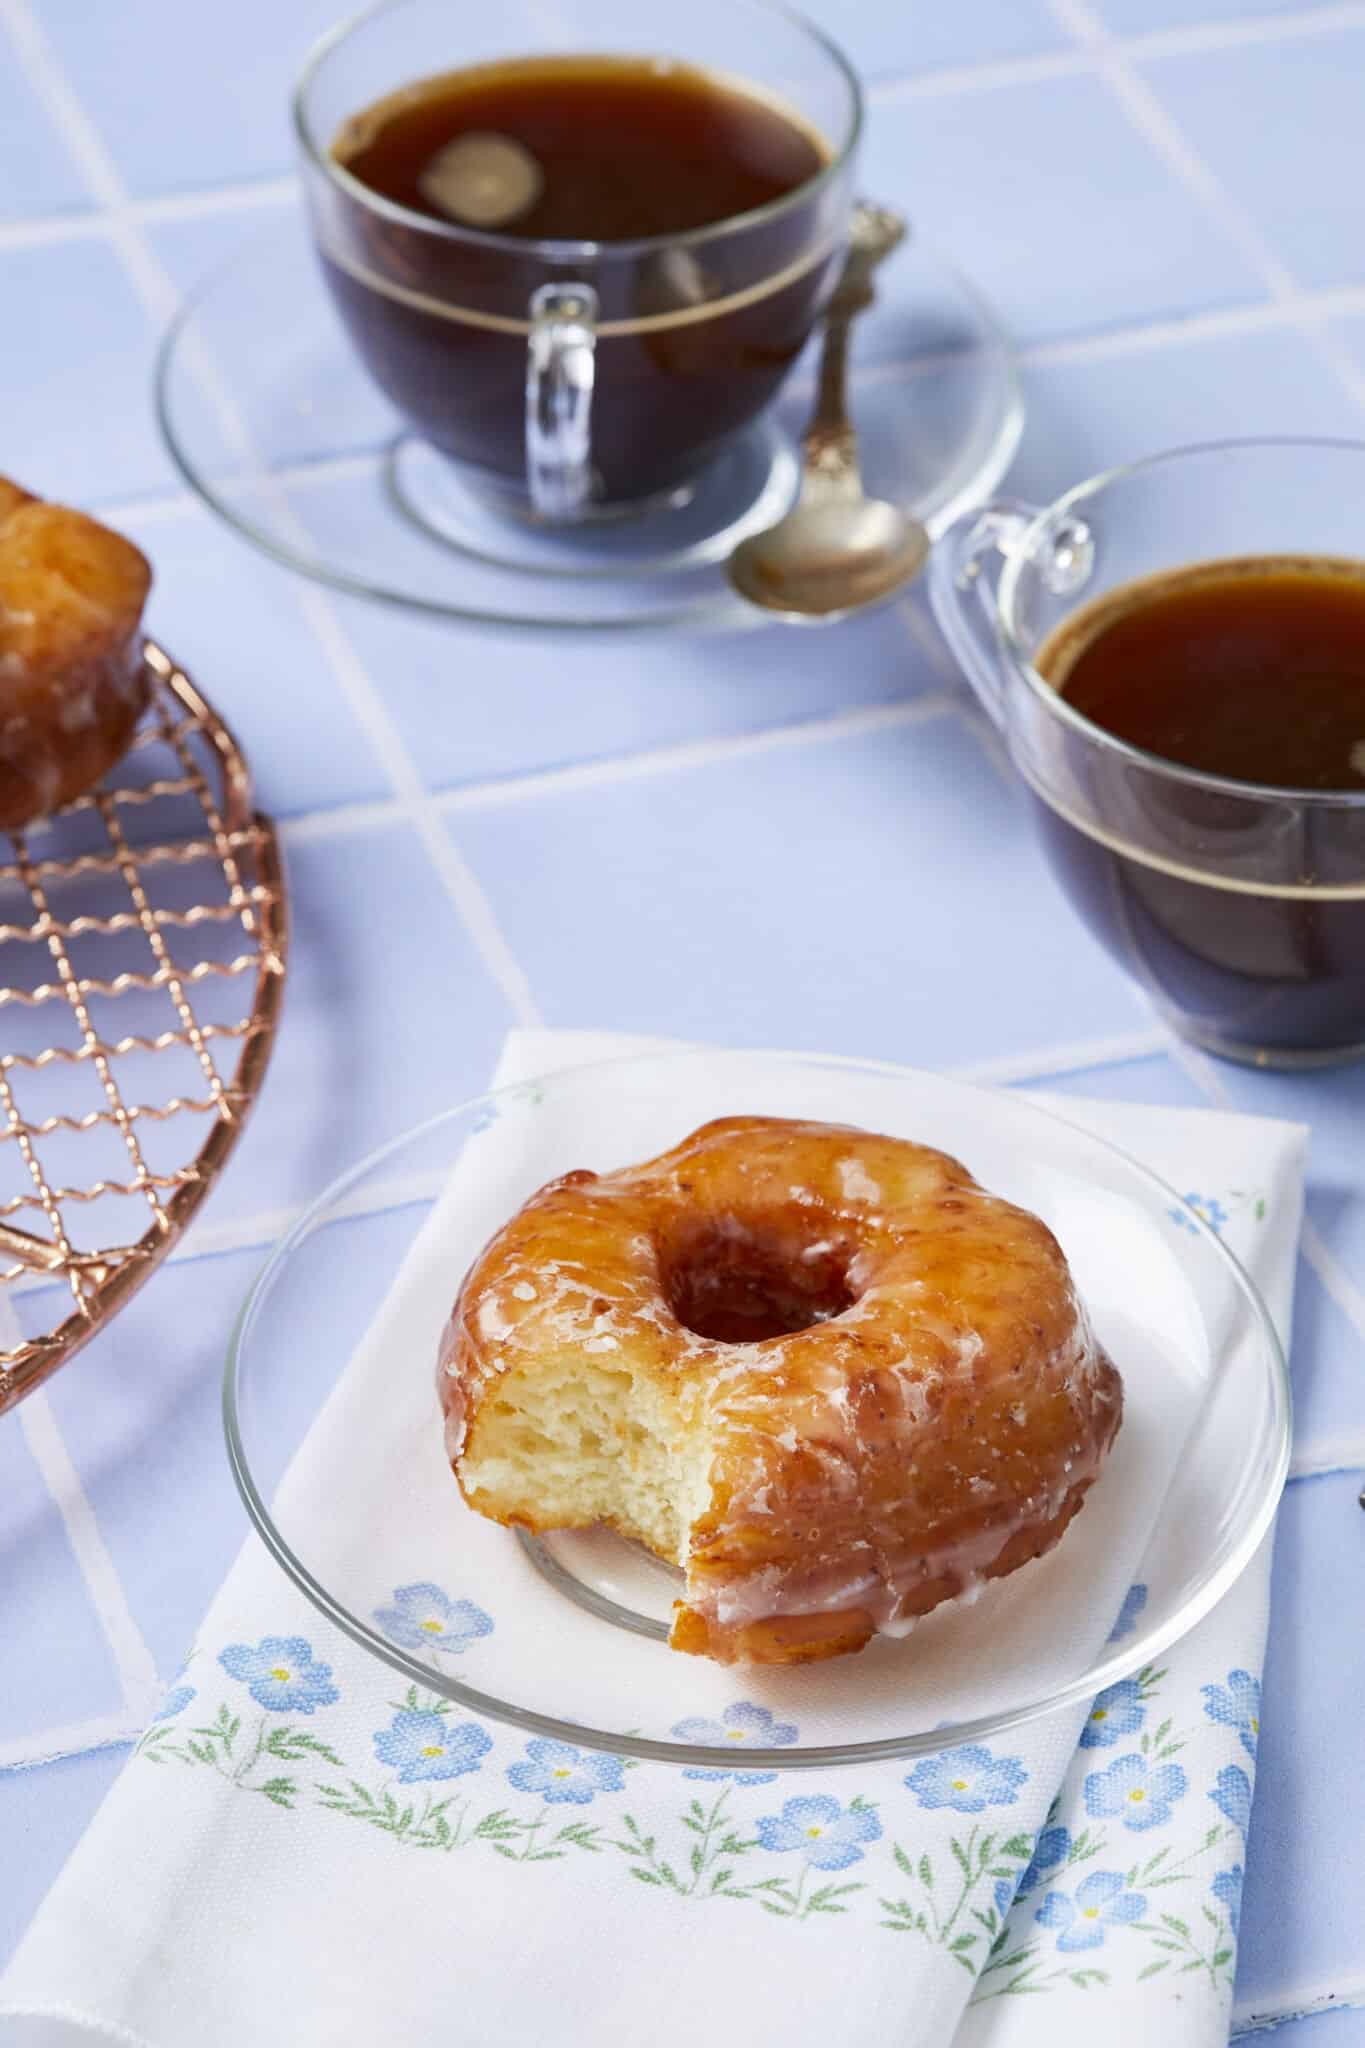 A close shot at a perfectly fried and glazed donut on a clear glass dessert plate, with one bite taken. The interior looks light with lots of air pockets. Served with tea. 